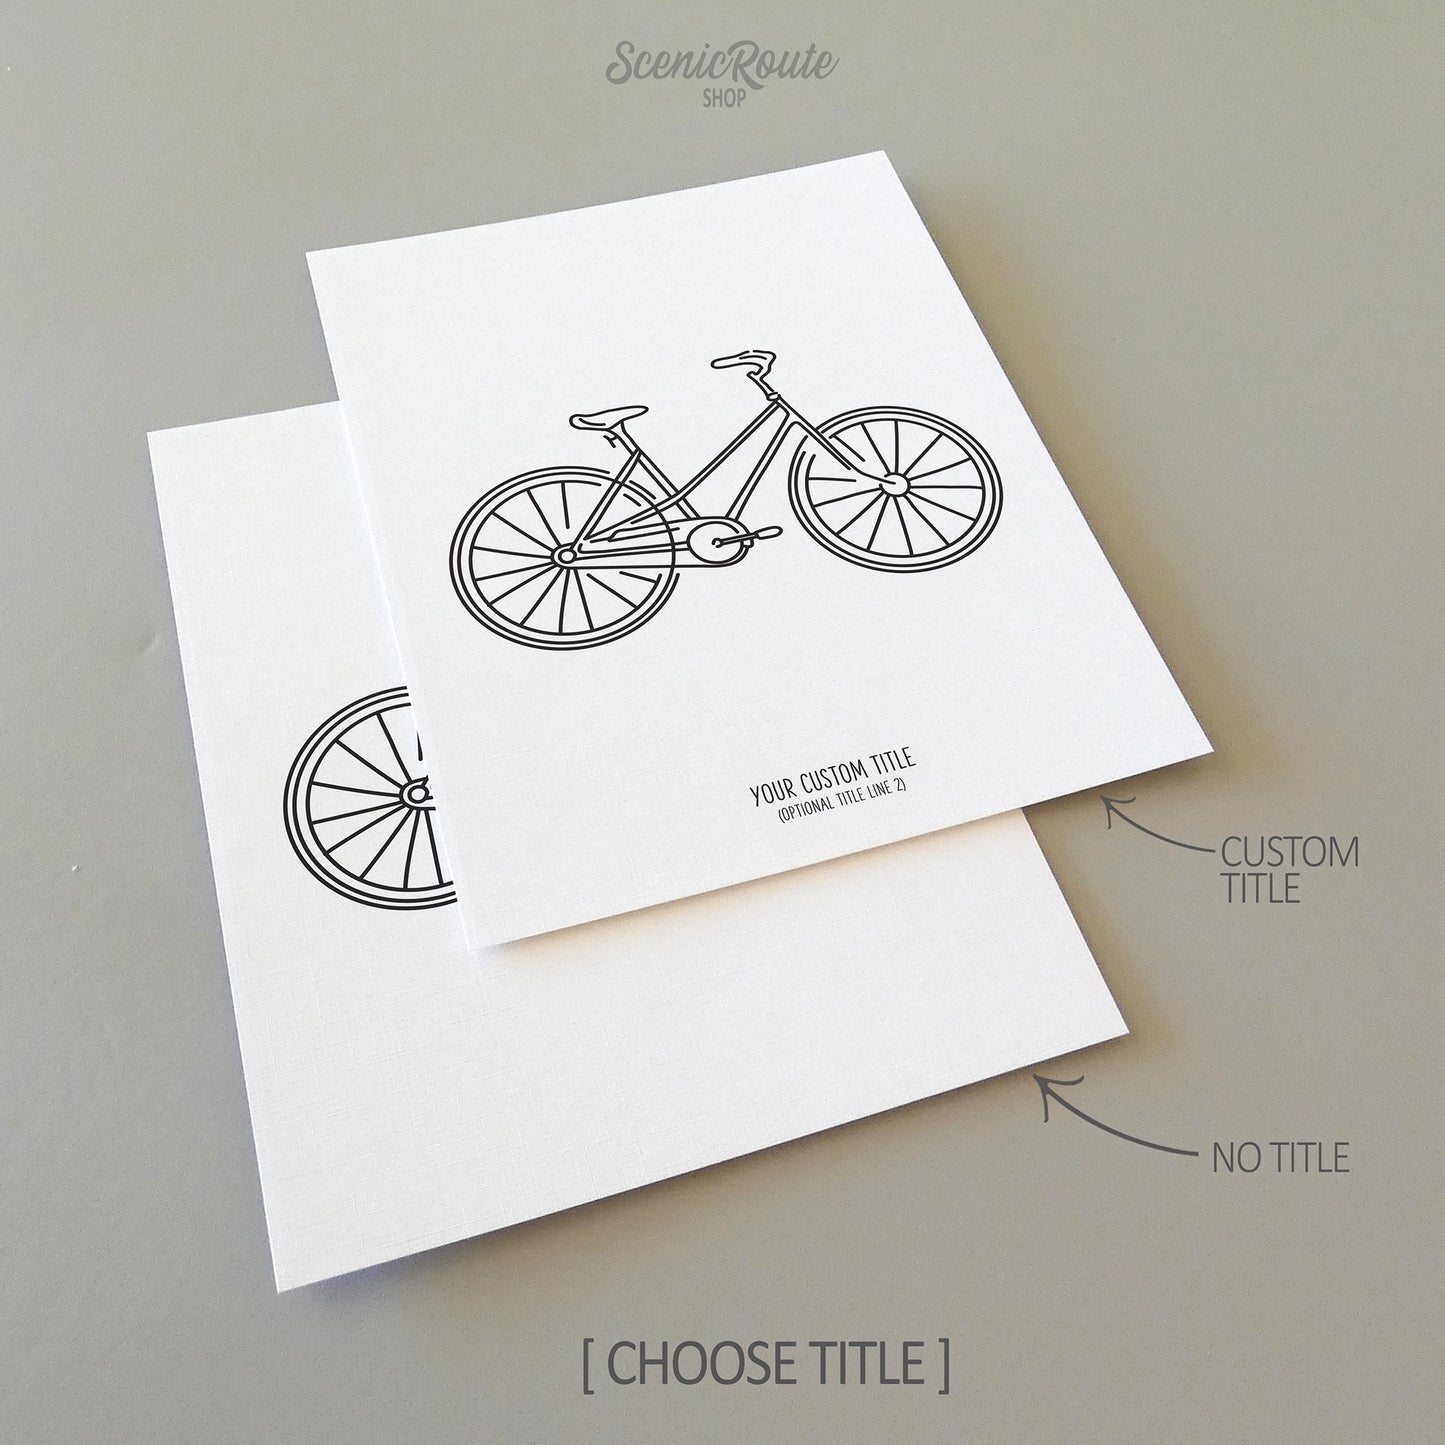 Two line art drawings of a Bicycle on white linen paper with a gray background.  The pieces are shown with “No Title” and “Custom Title” options for the available art print options.